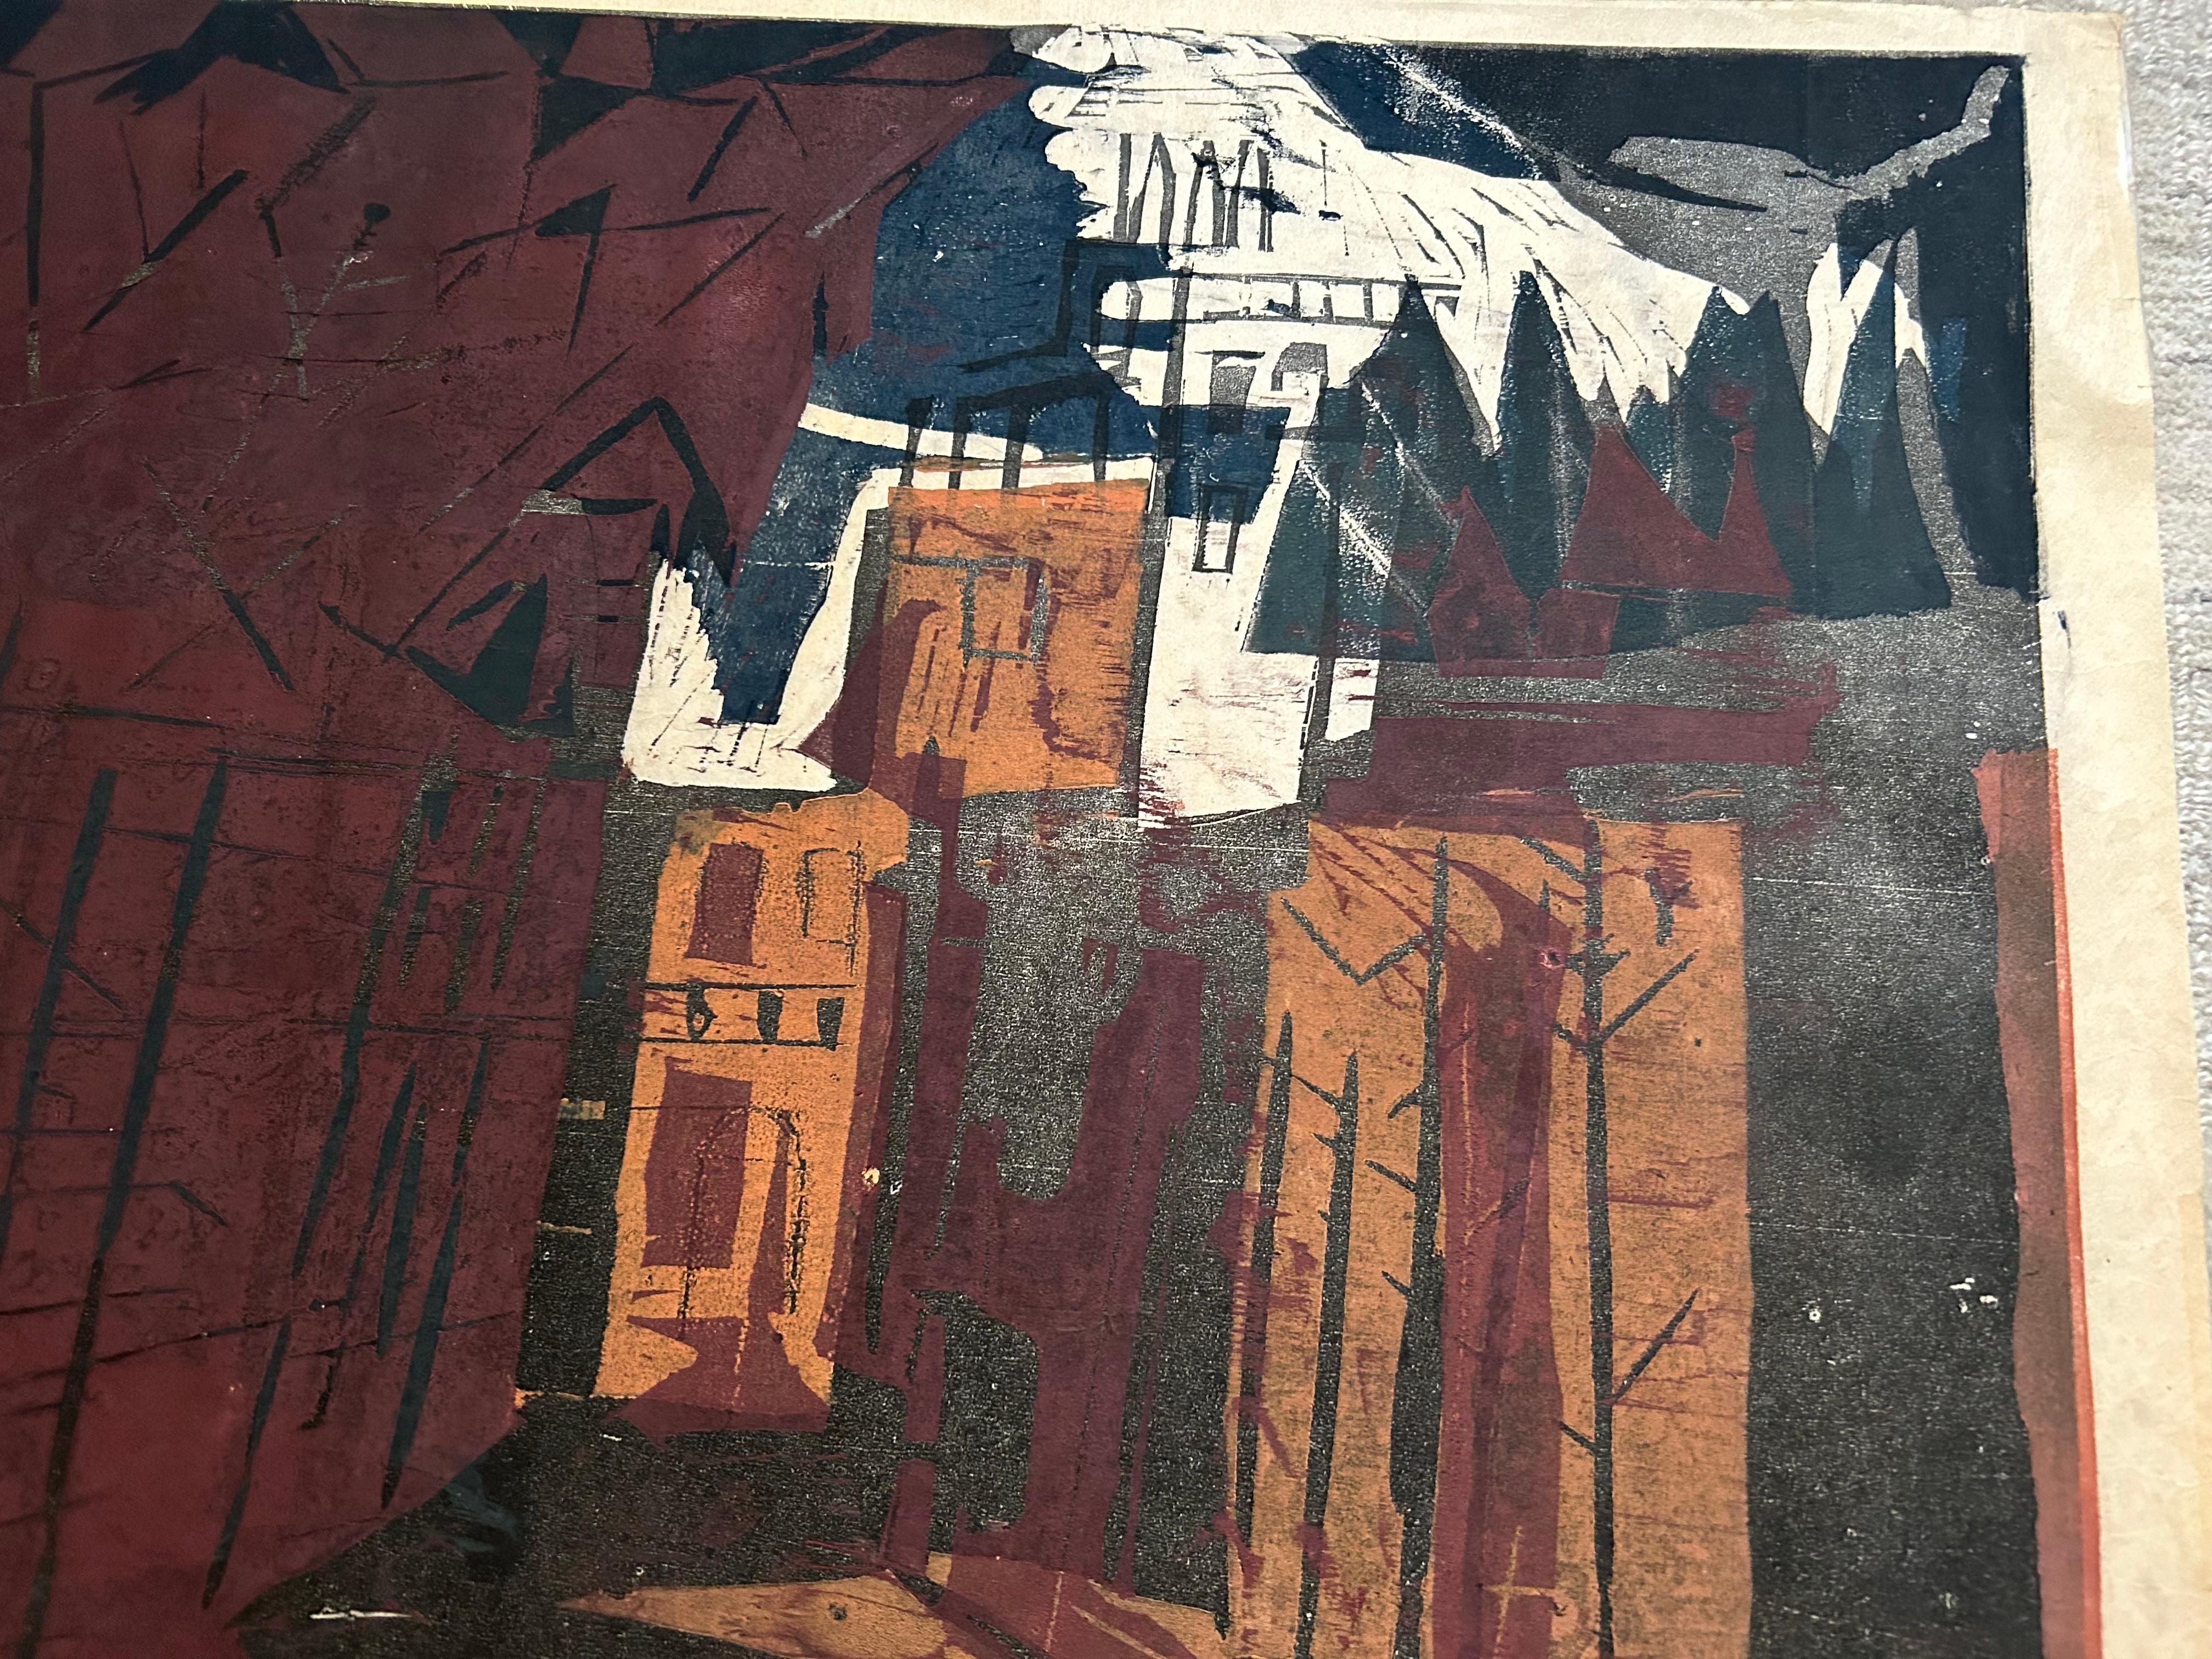 Vitale Trenta Aprile, Roma is a
Monoprint of a street scene in Rome in 1960.
The modernist interpretation of an ancient city is exquisitely rendered by Steg. His use of color and chiaroscuro creates a compelling 
work that is multifaceted.